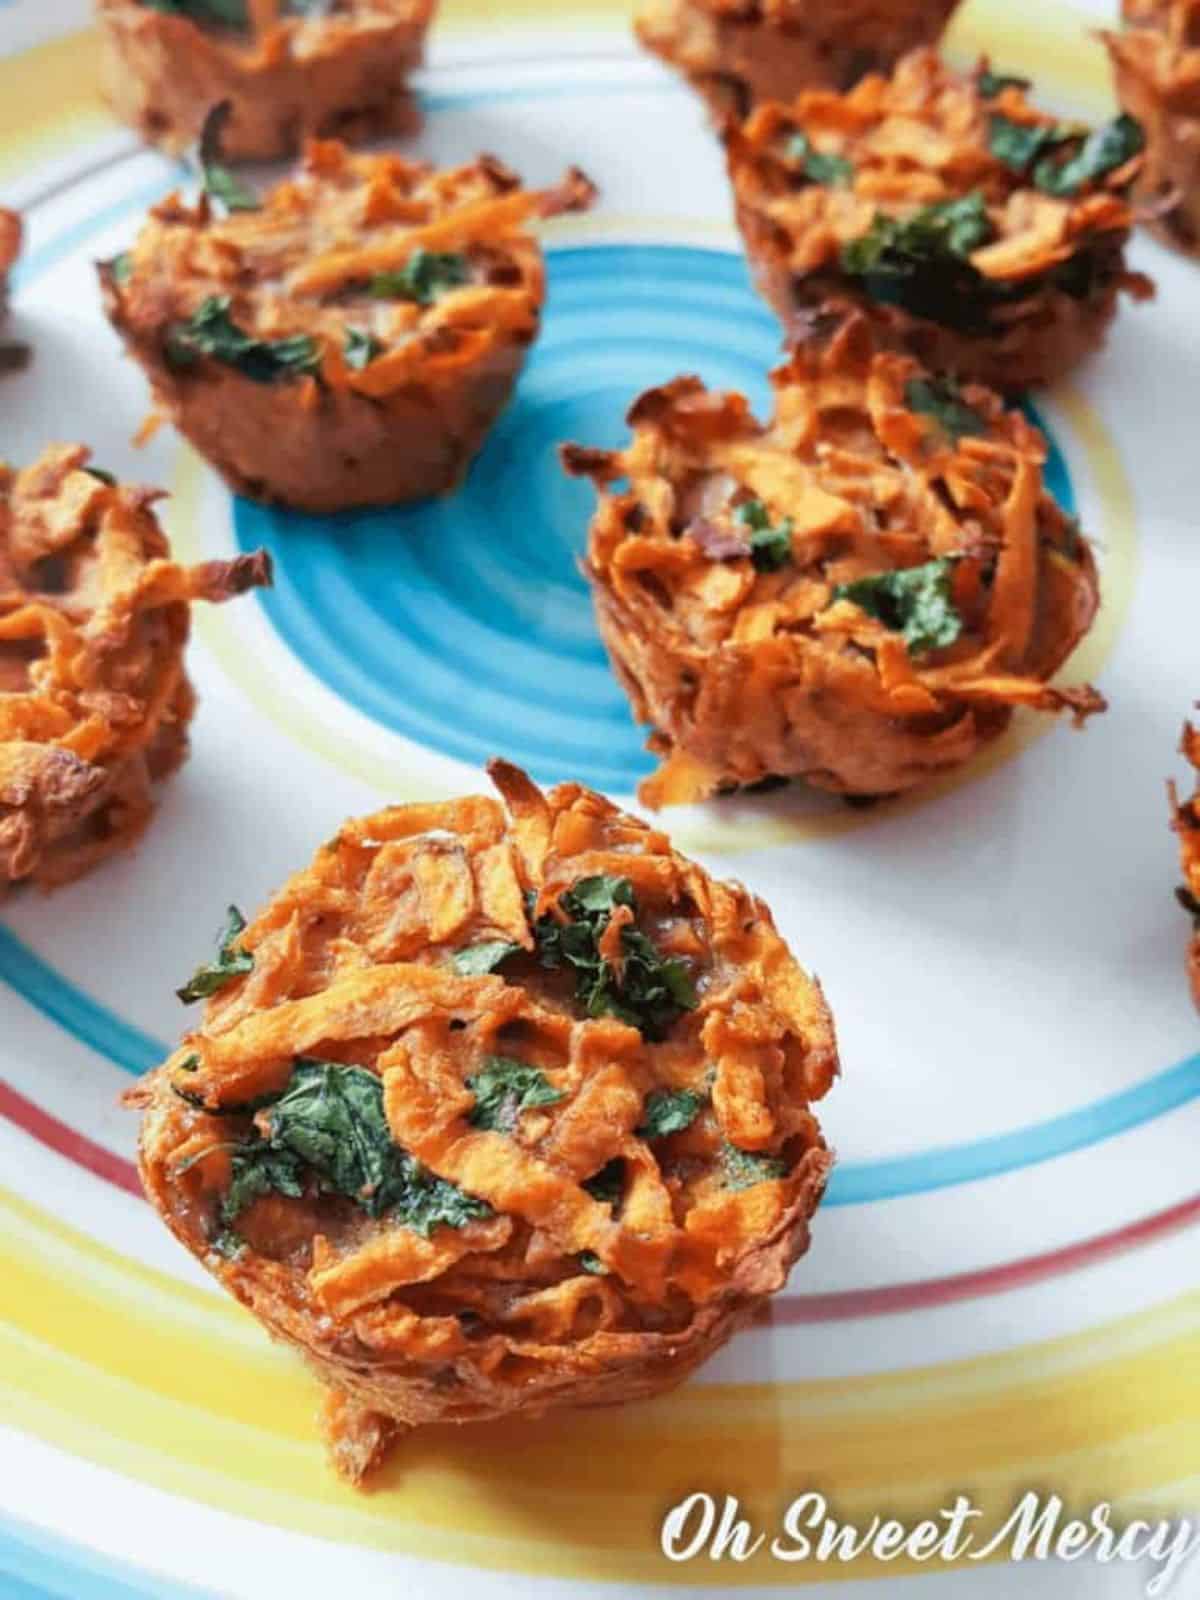 Crunchy Baked Sweet Potato Kale Tots on a colorful plate.